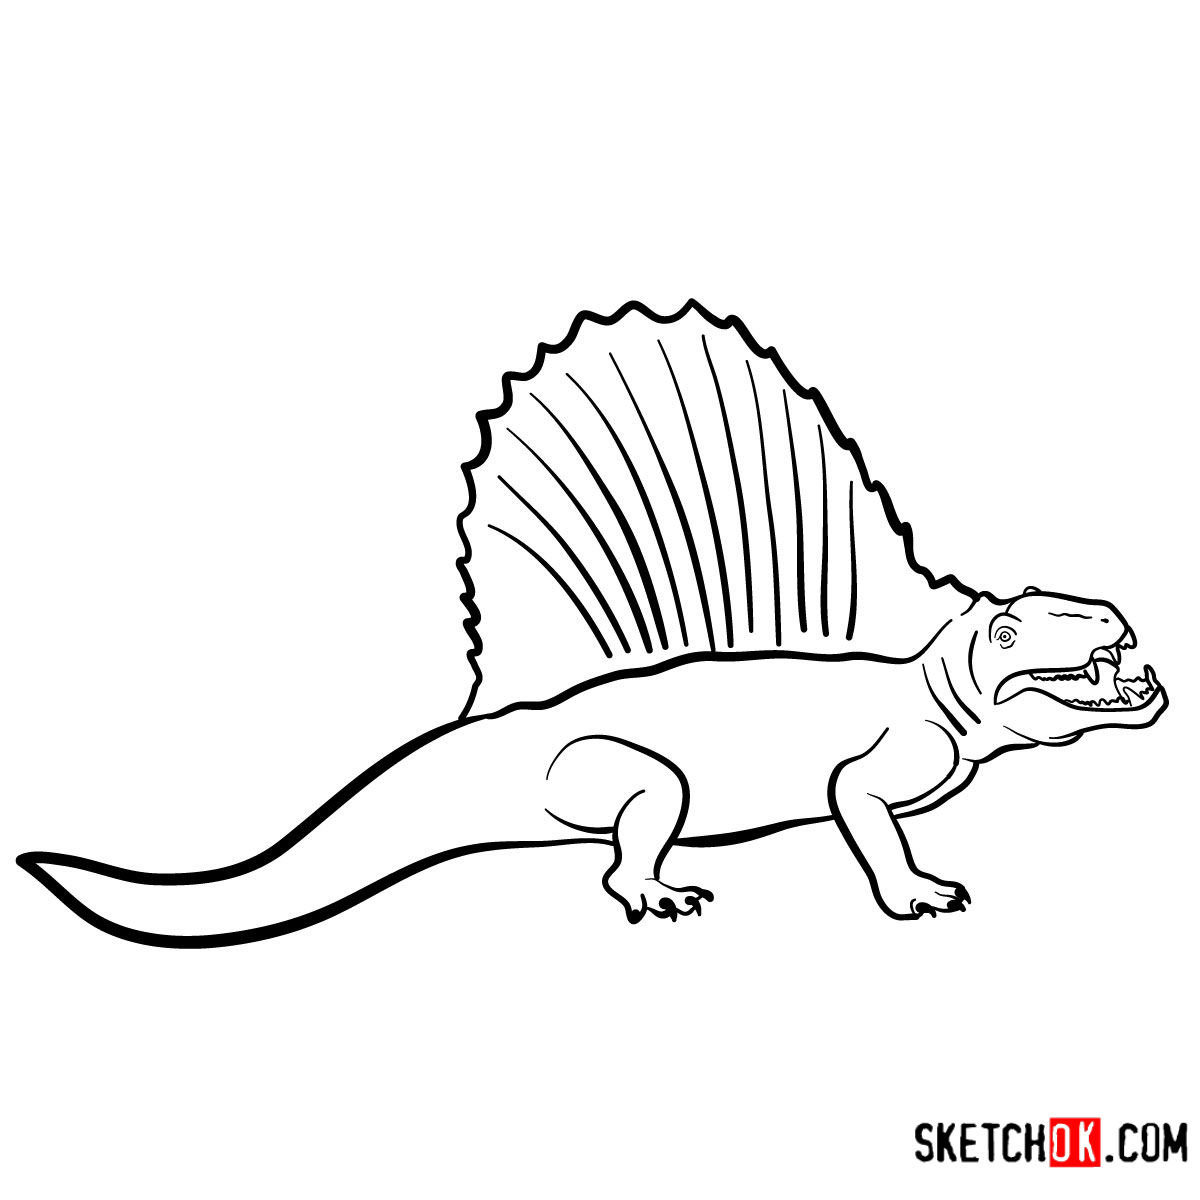 Dimetrodon In The Jungle Coloring Pages - AMIRASORAYA-AMMY